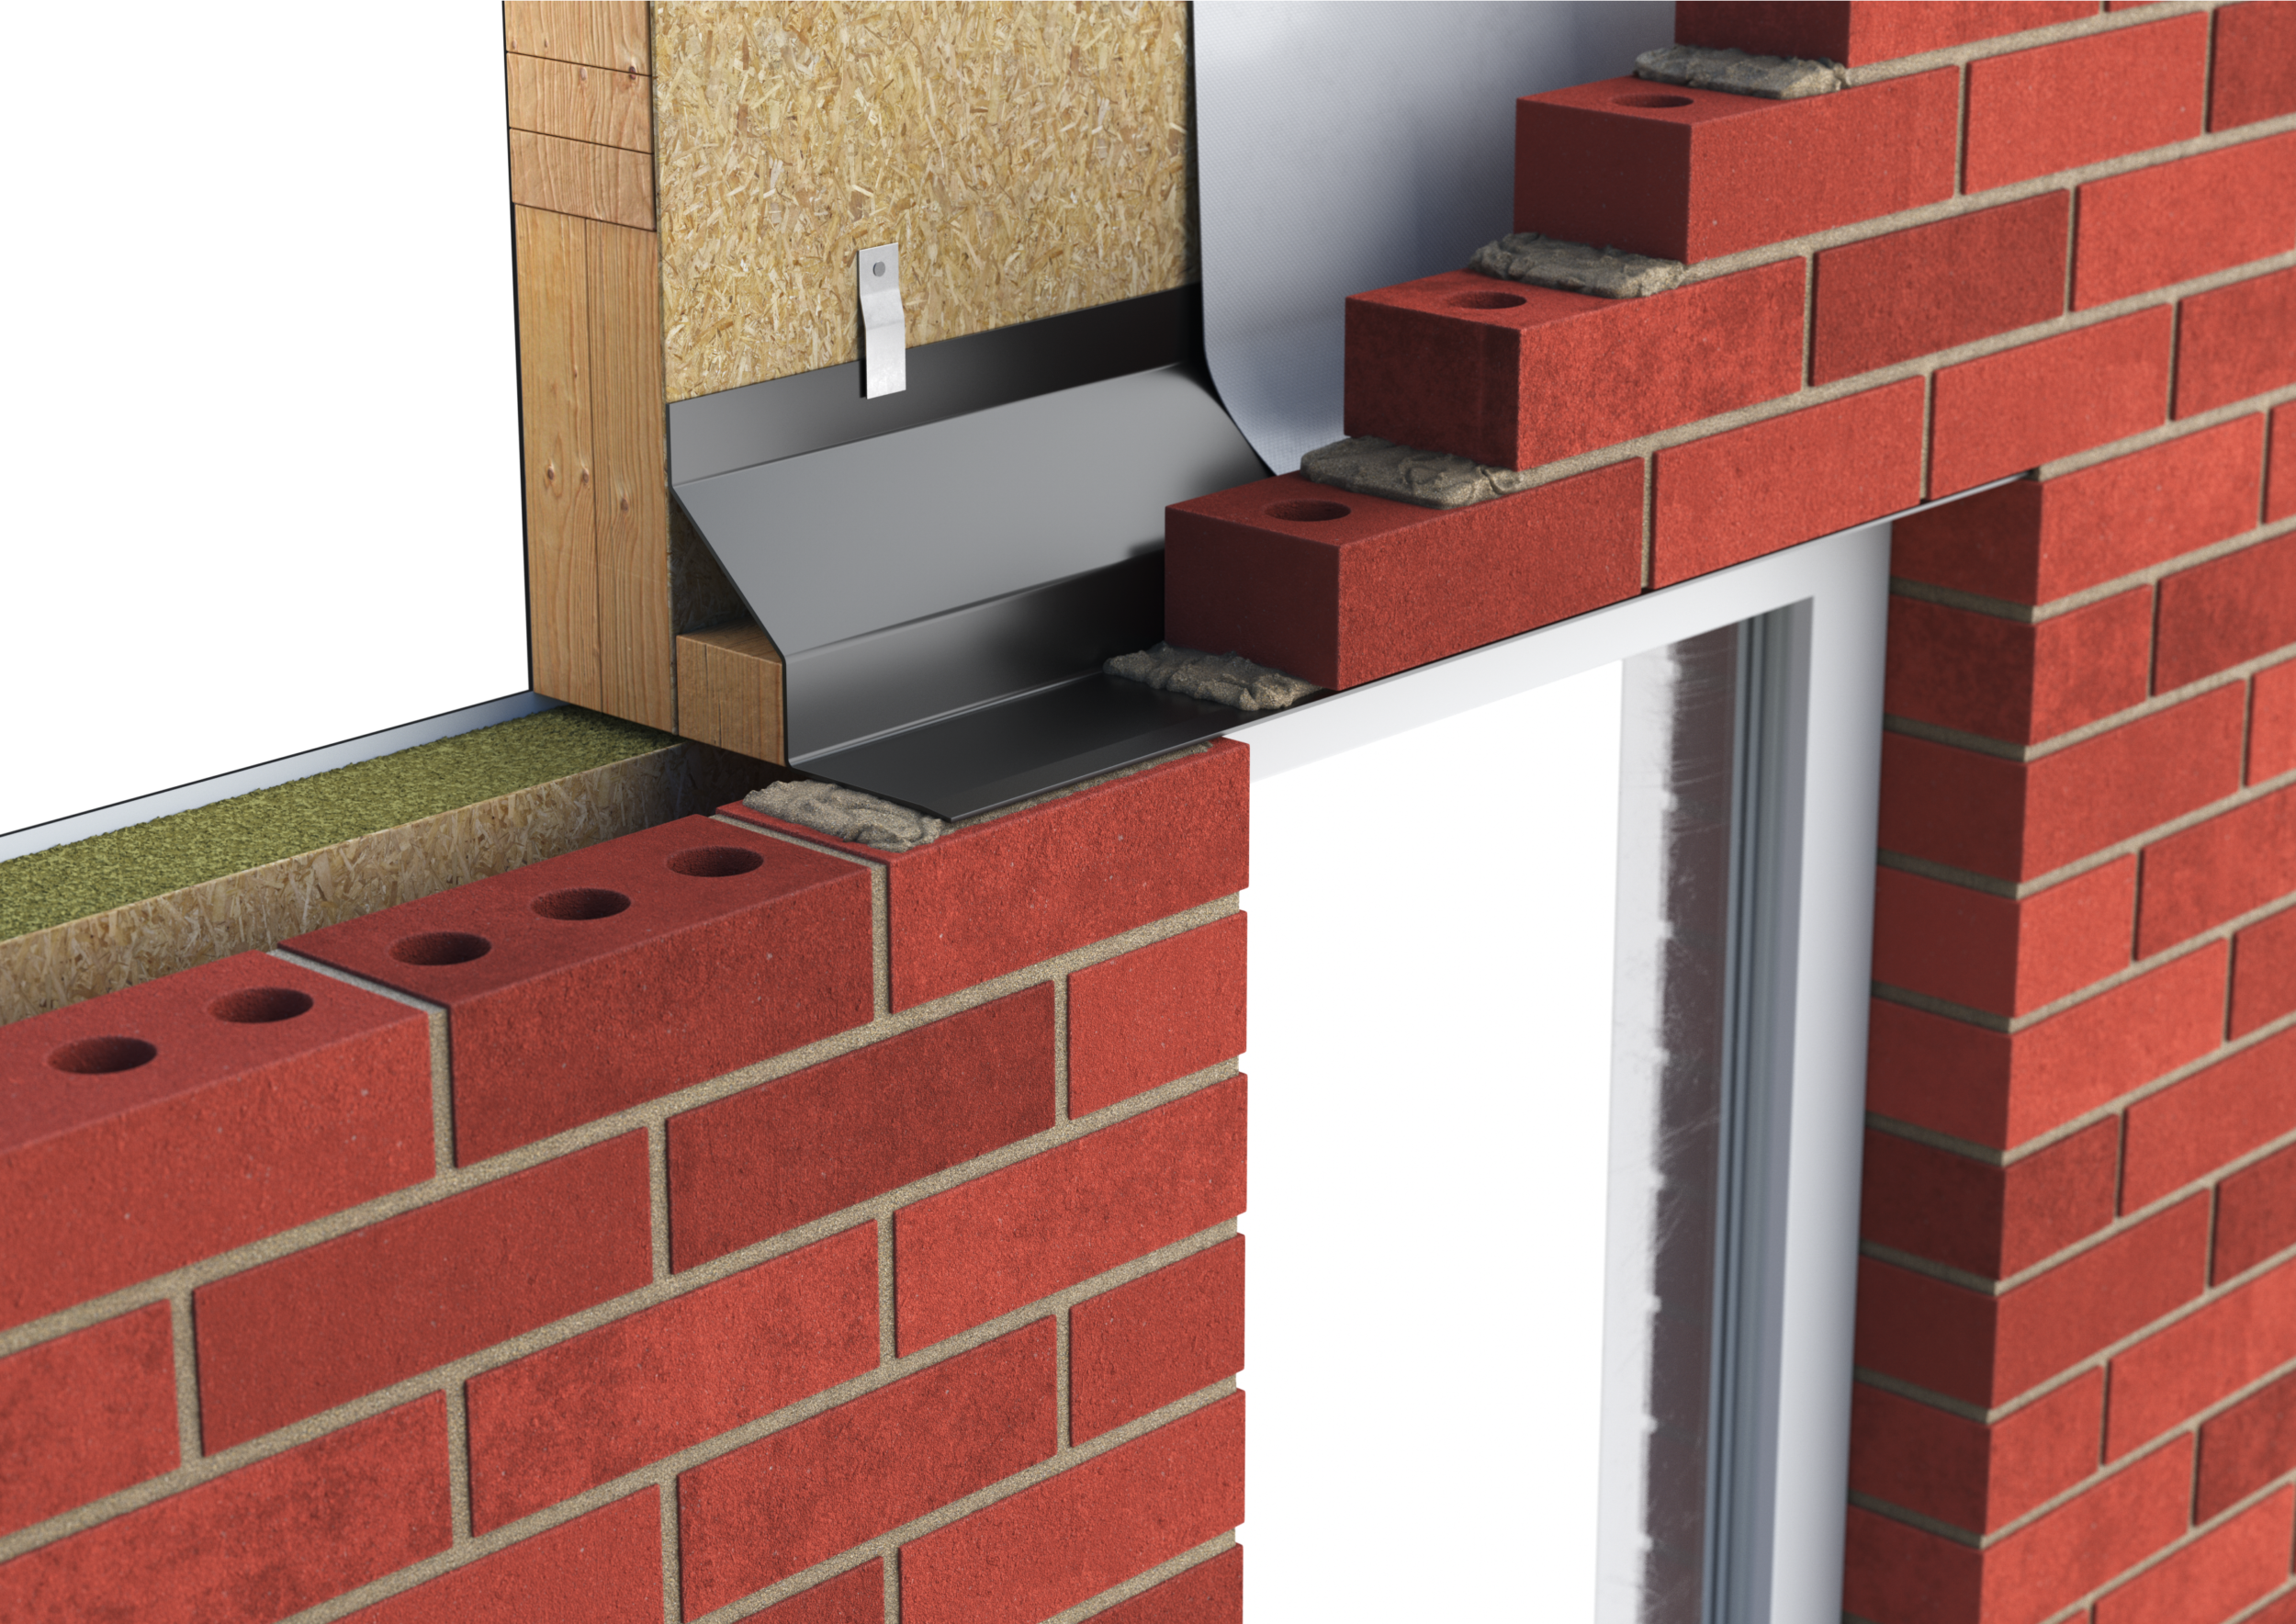 Catnic standard duty timber frame lintel for 70-85mm cavity wall shown in situ